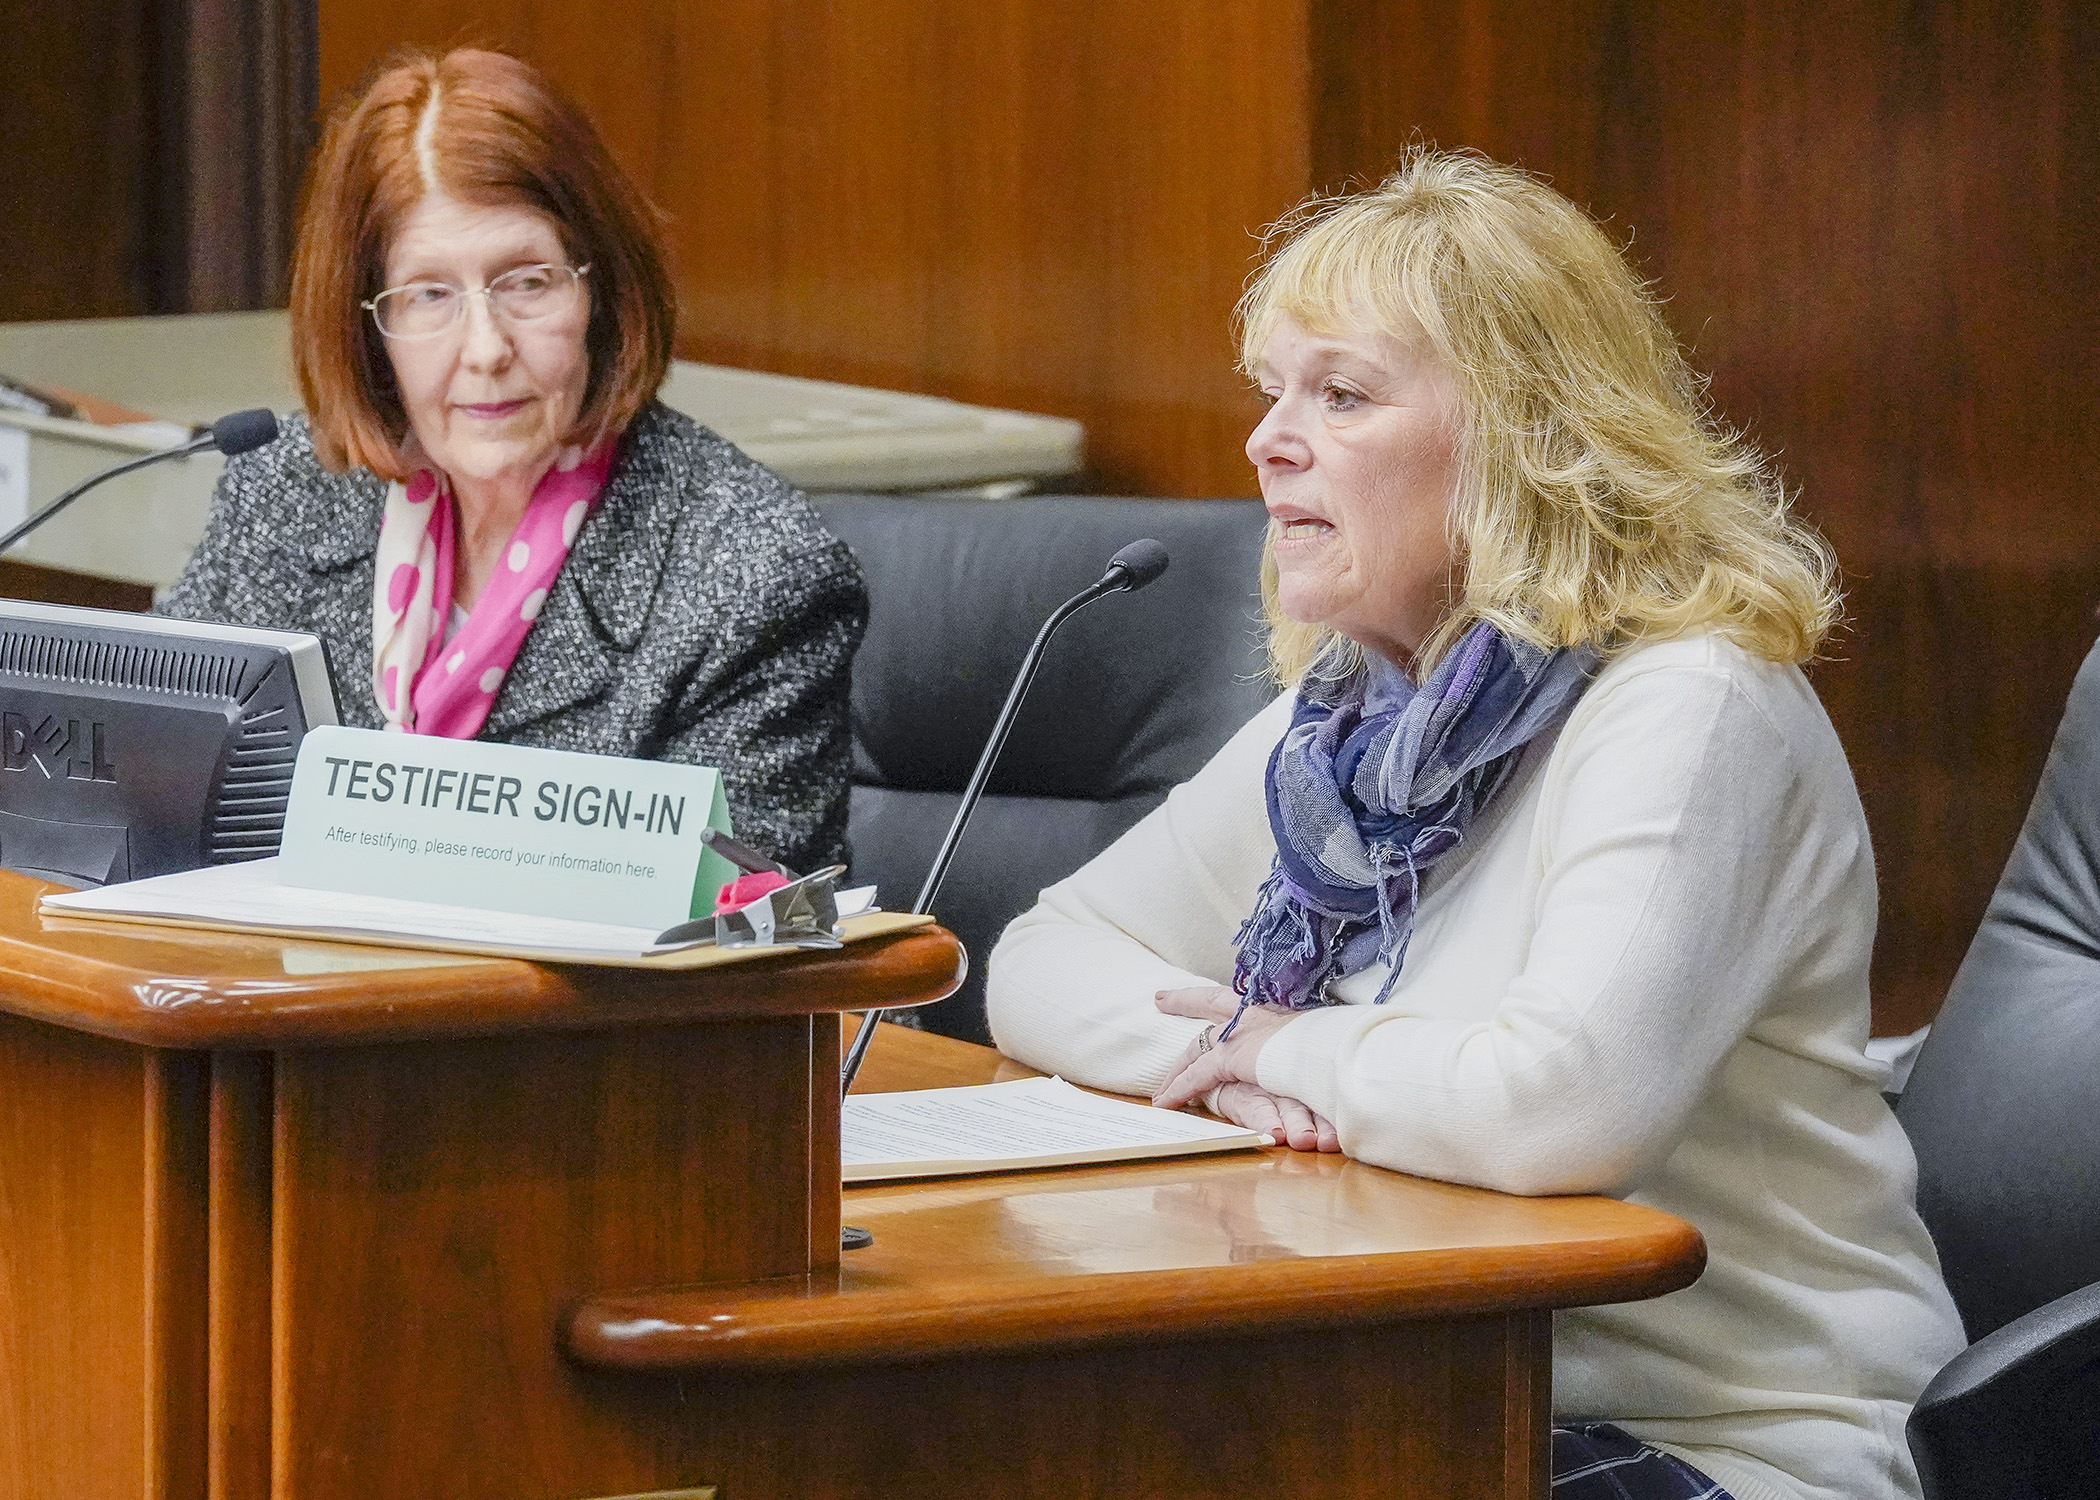 Cathy Blaeser, right, testifies before the House Health Finance and Policy Committee Jan. 12 against HF91, a bill sponsored by Rep. Tina Liebling, left. (Photo by Andrew VonBank)